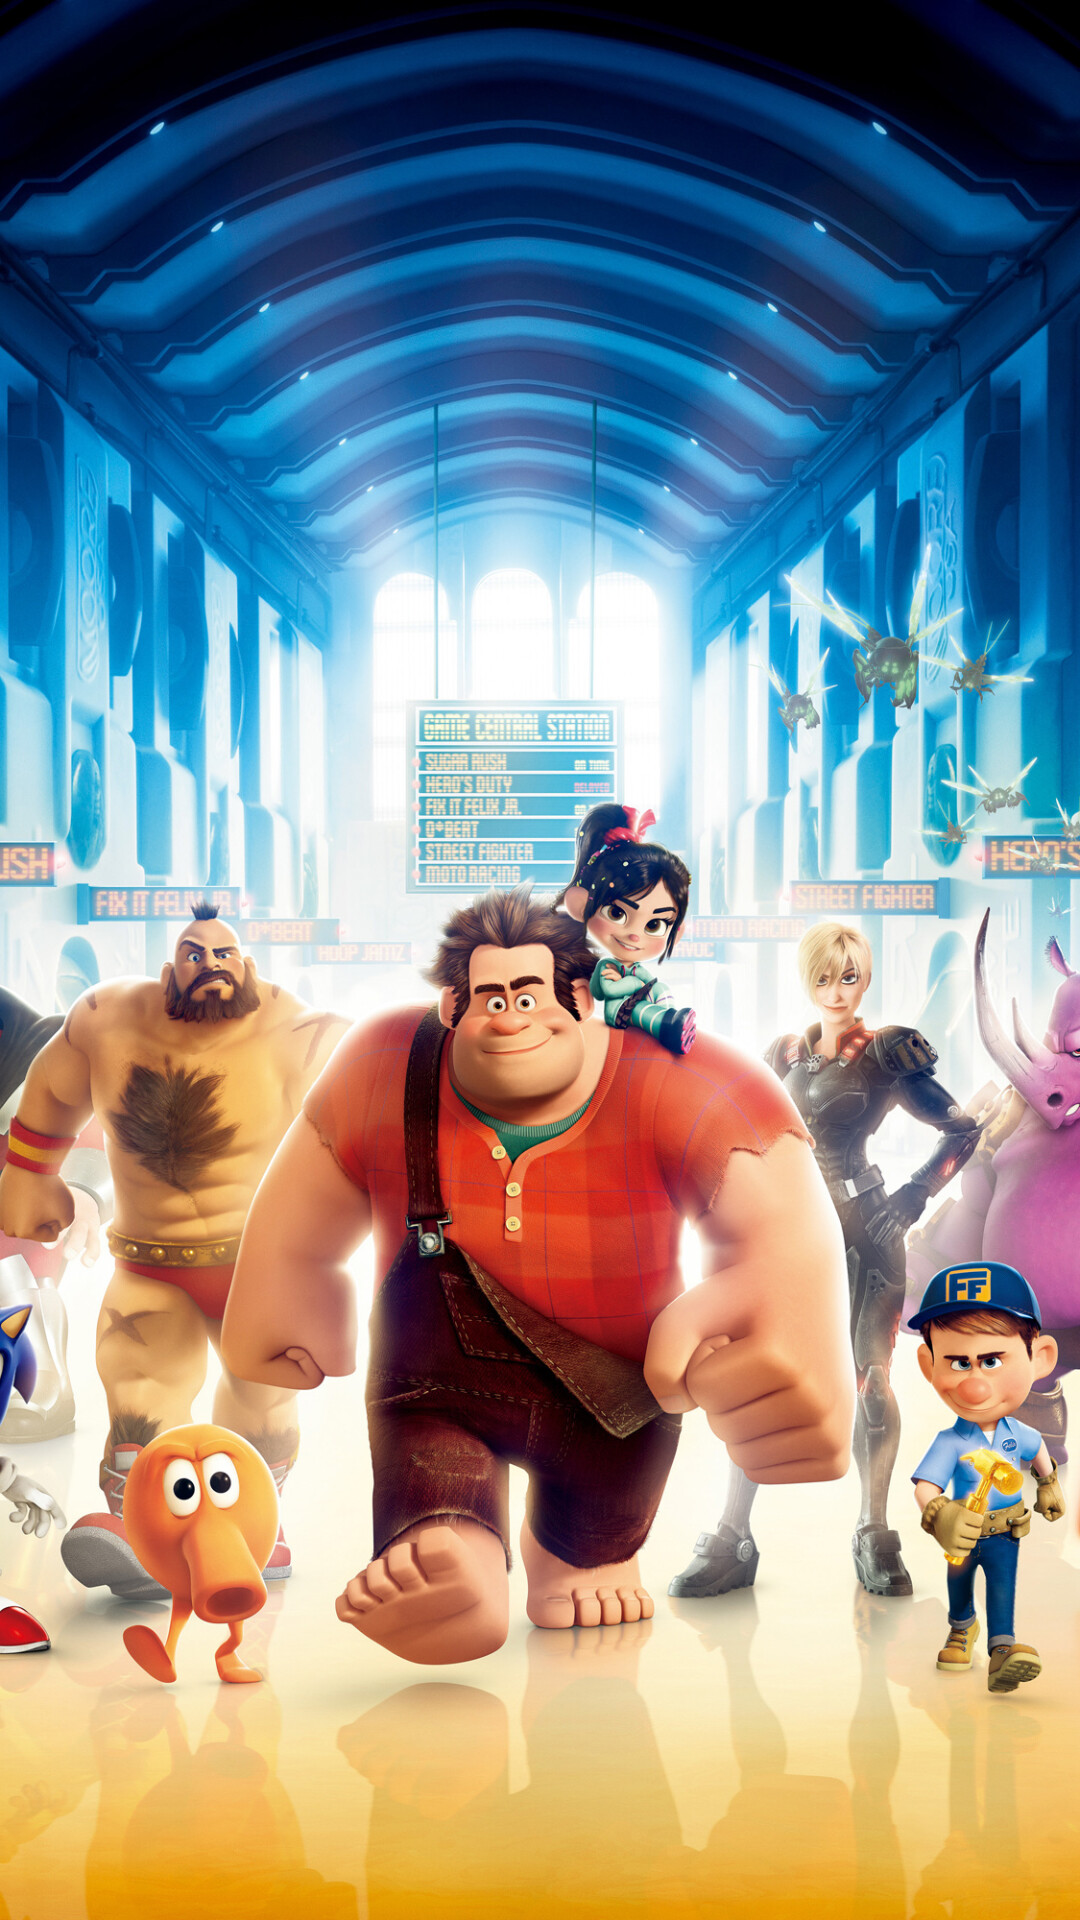 Wreck-It Ralph: Game-teamed animated movie directed by Rich Moore. 1080x1920 Full HD Wallpaper.